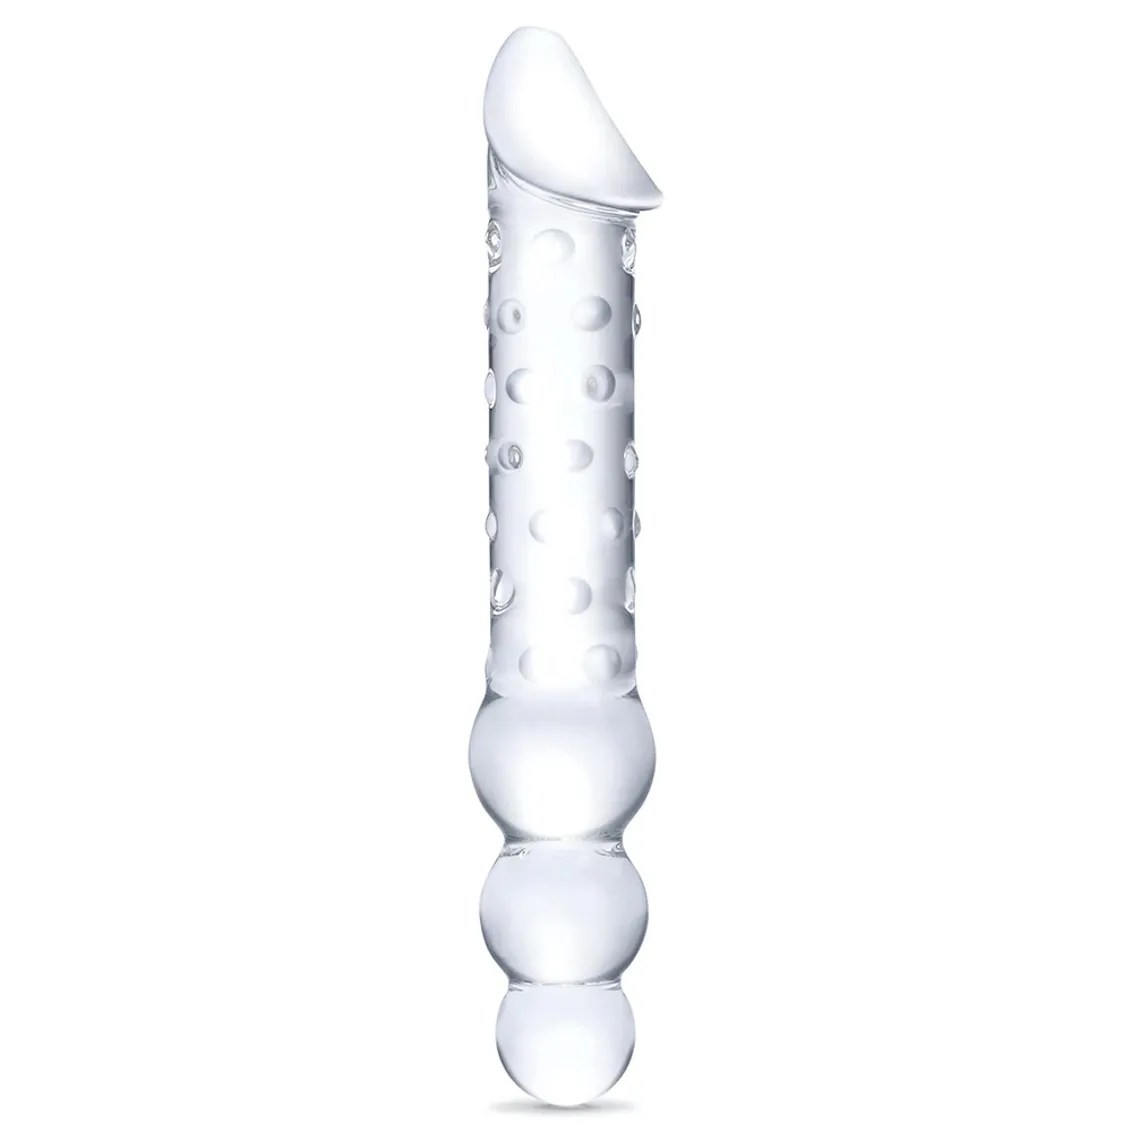 alexander mccain recommends 12 Inch Glass Dildo